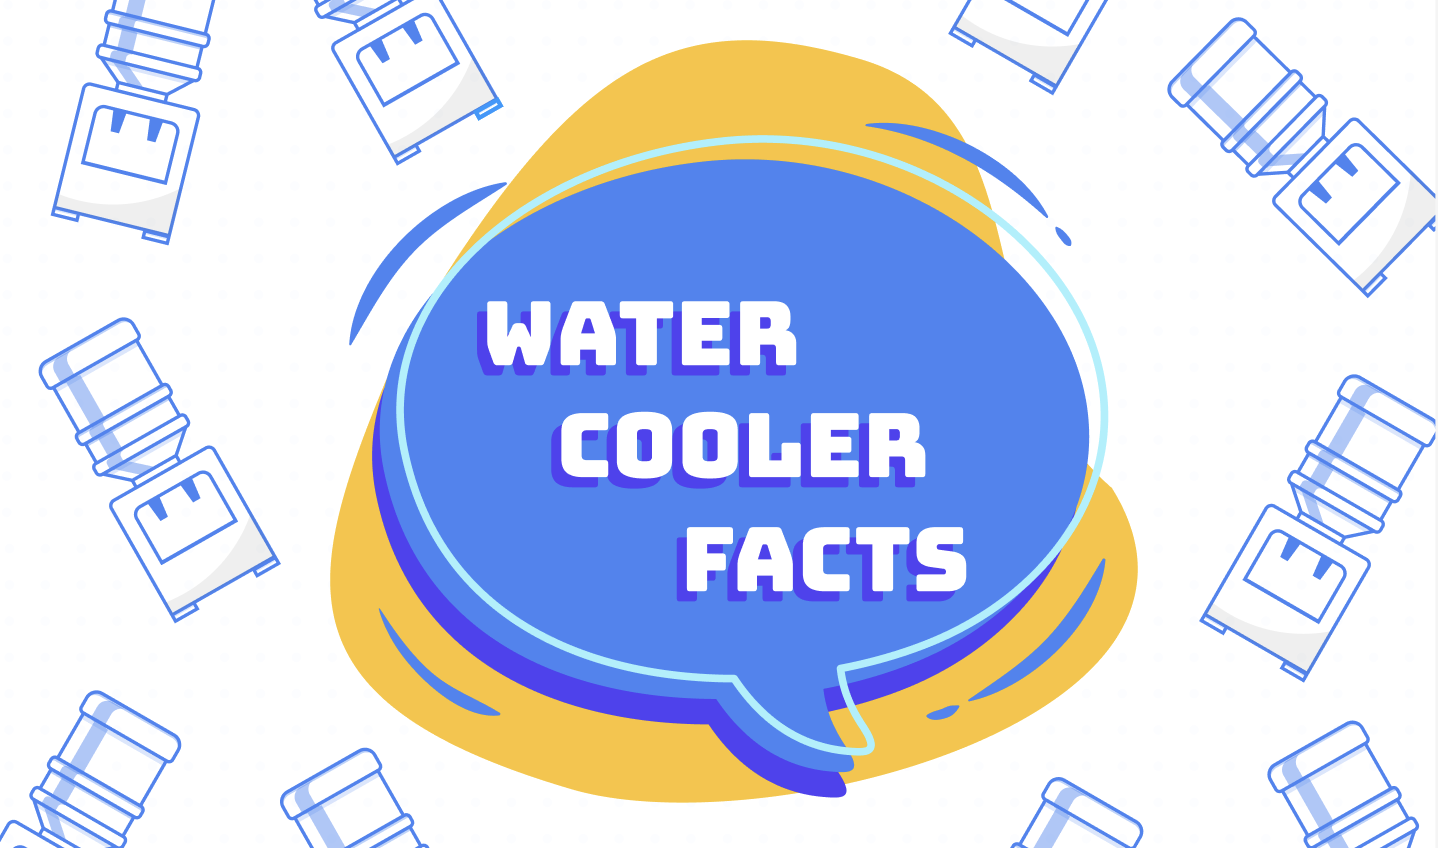 Water Cooler Facts Image